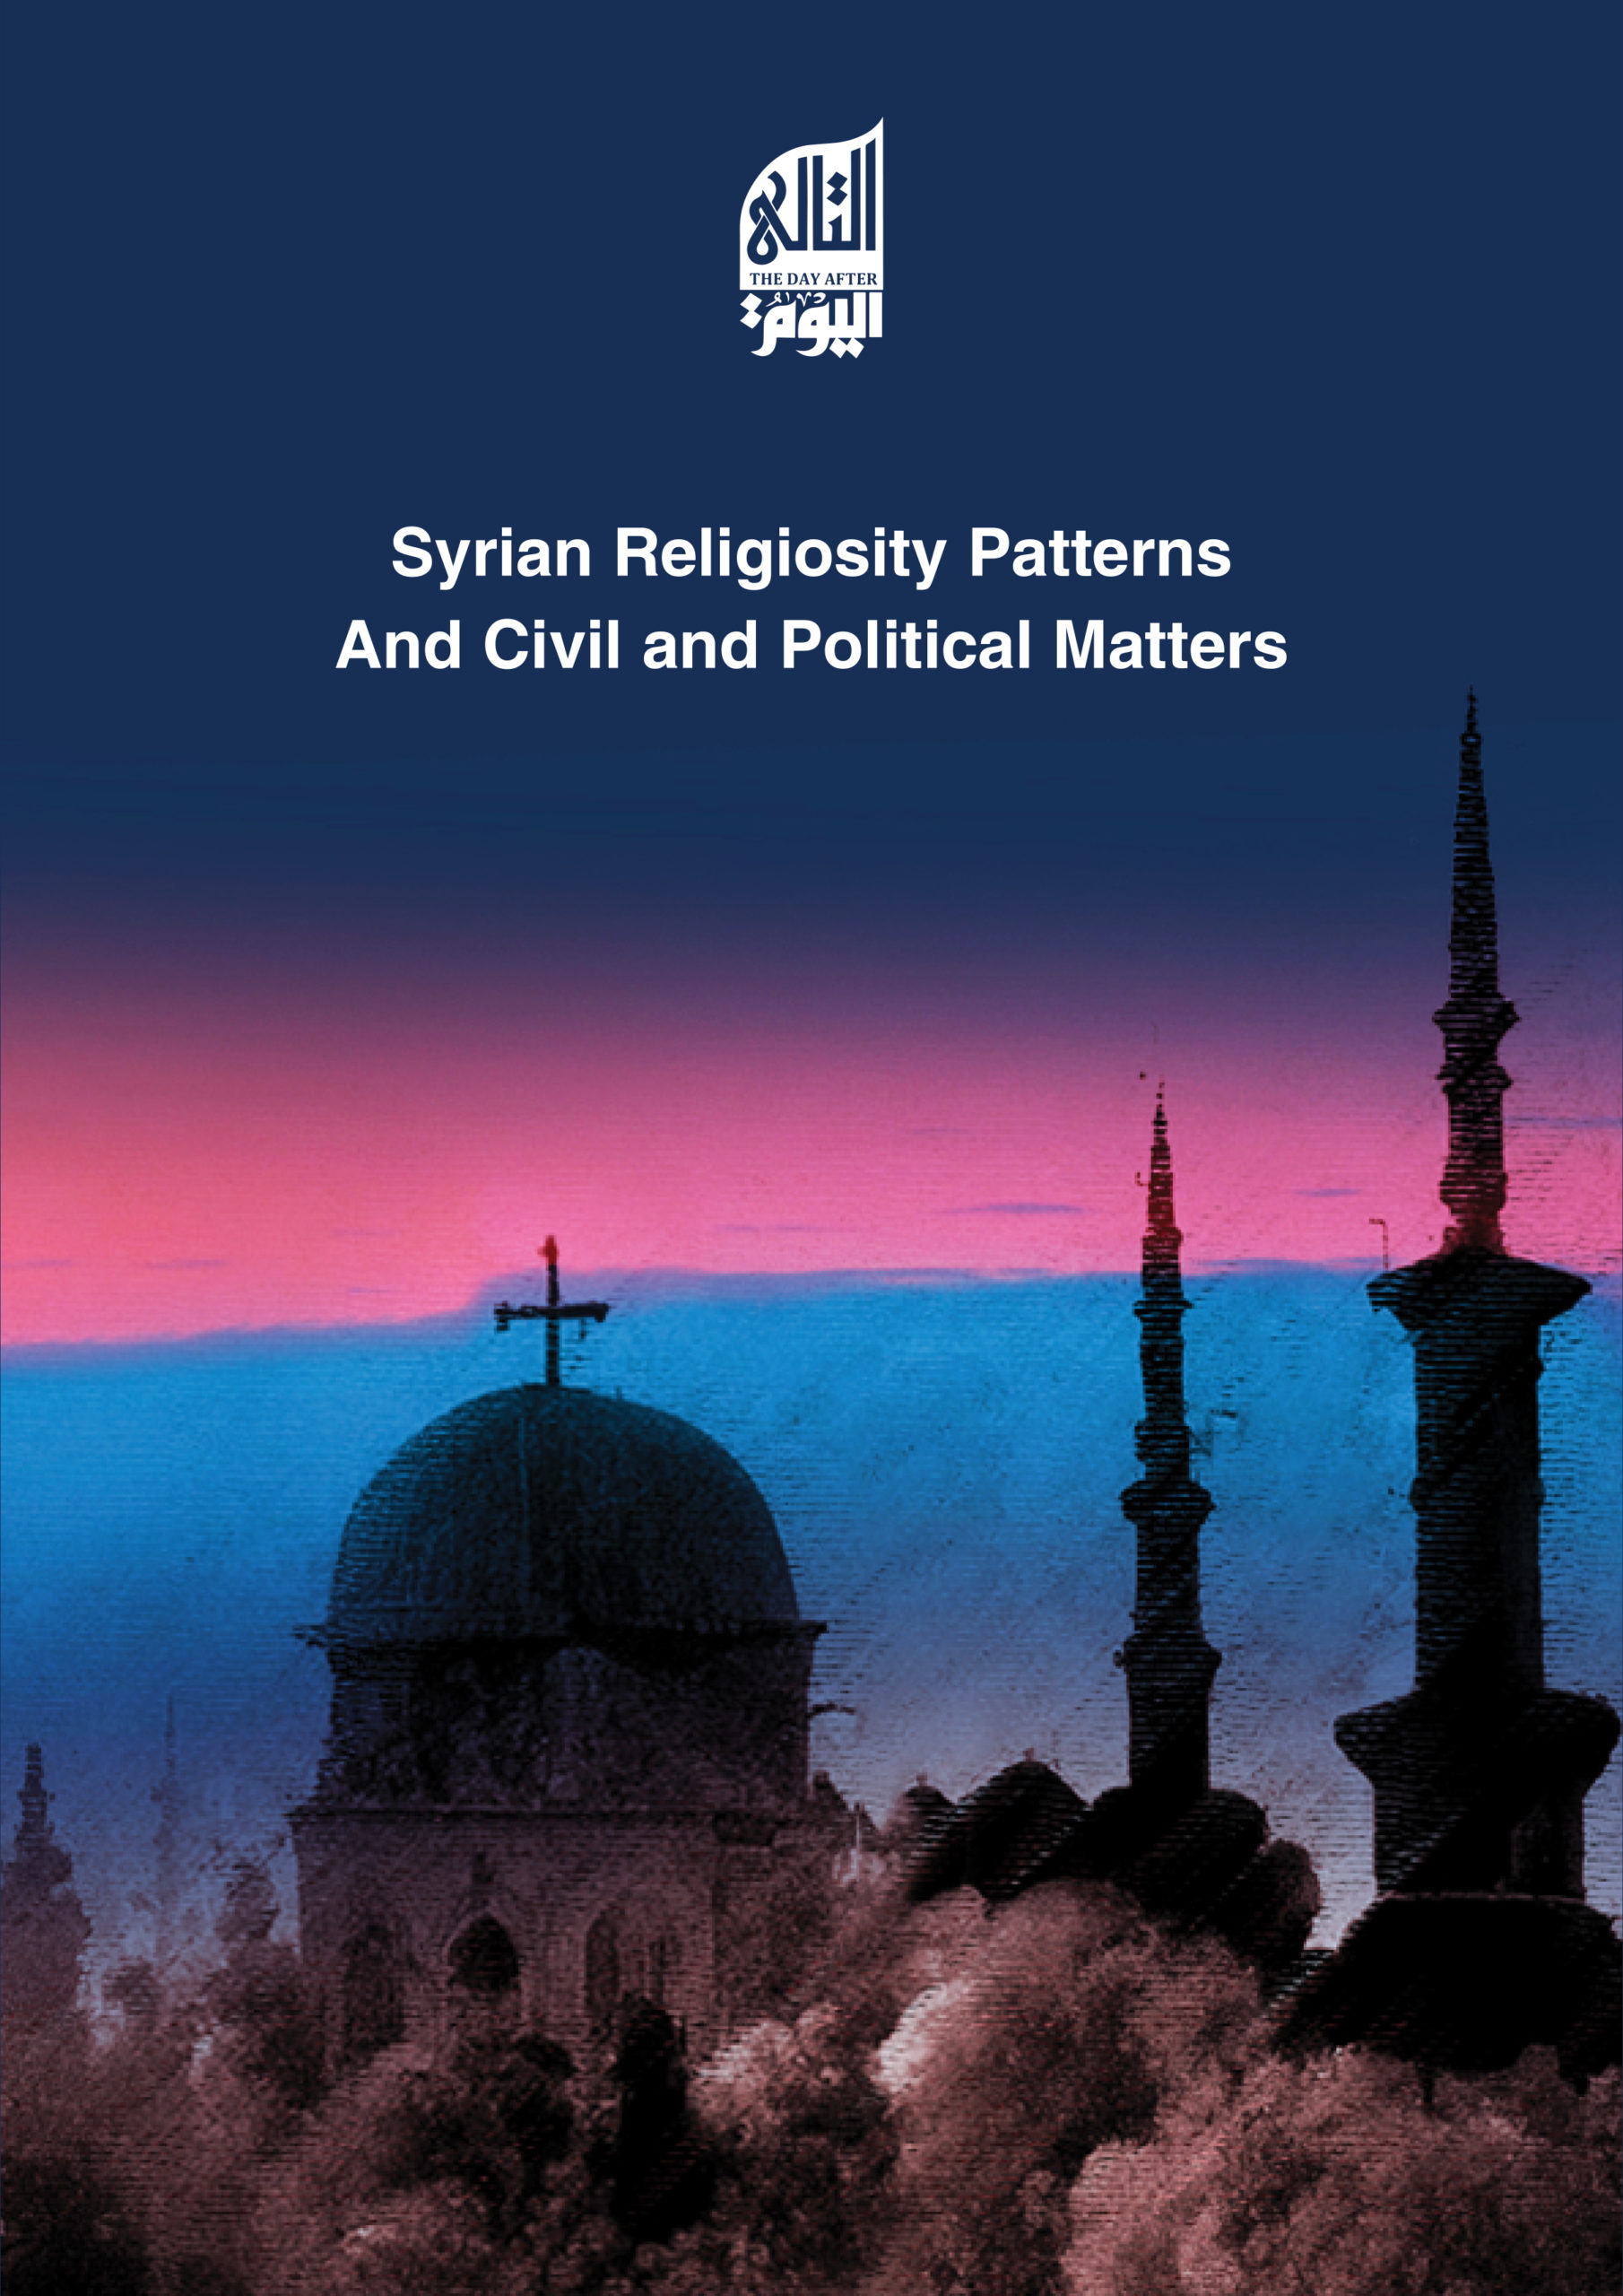 Syrian Religiosity Patterns And Civil and Political Matters